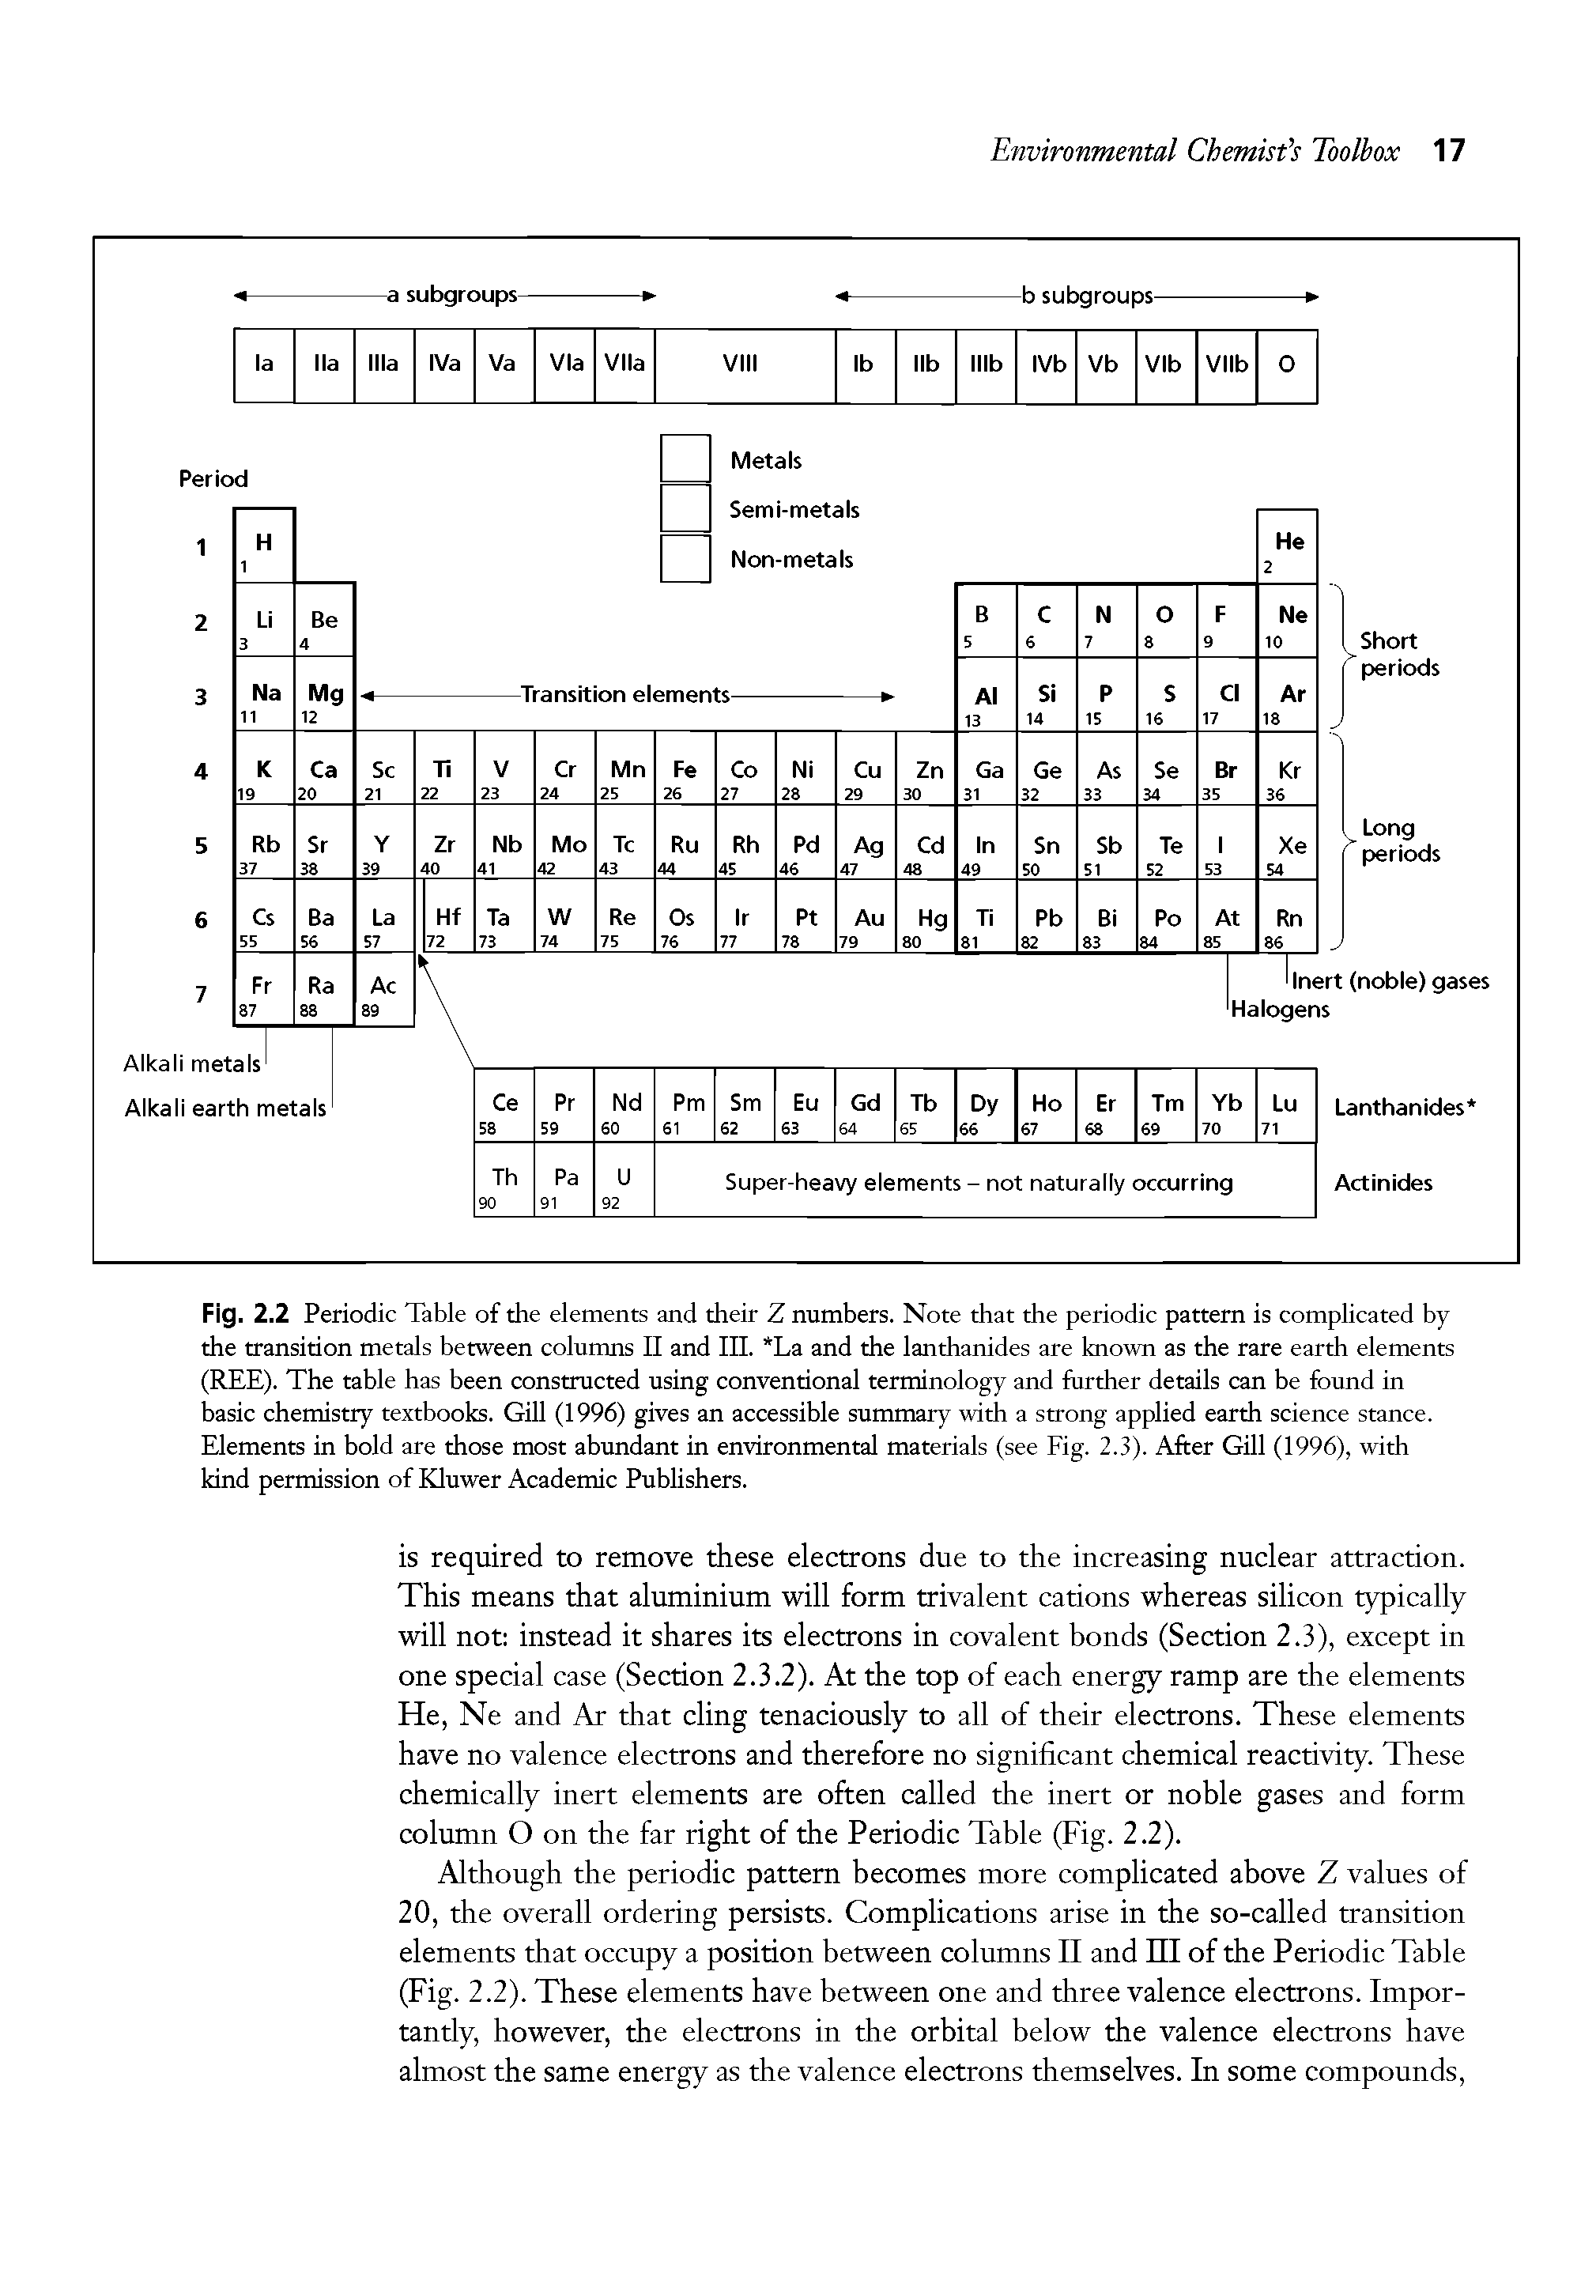 Fig. 2.2 Periodic Table of the elements and their Z numbers. Note that the periodic pattern is complicated by the transition metals between columns II and III. La and the lanthanides are known as the rare earth elements (REE). The table has been constructed using conventional terminology and further details can be found in basic chemistry textbooks. Gill (1996) gives an accessible summary with a strong applied earth science stance. Elements in bold are those most abundant in environmental materials (see Fig. 2.3). After Gill (1996), with kind permission of Kluwer Academic Publishers.